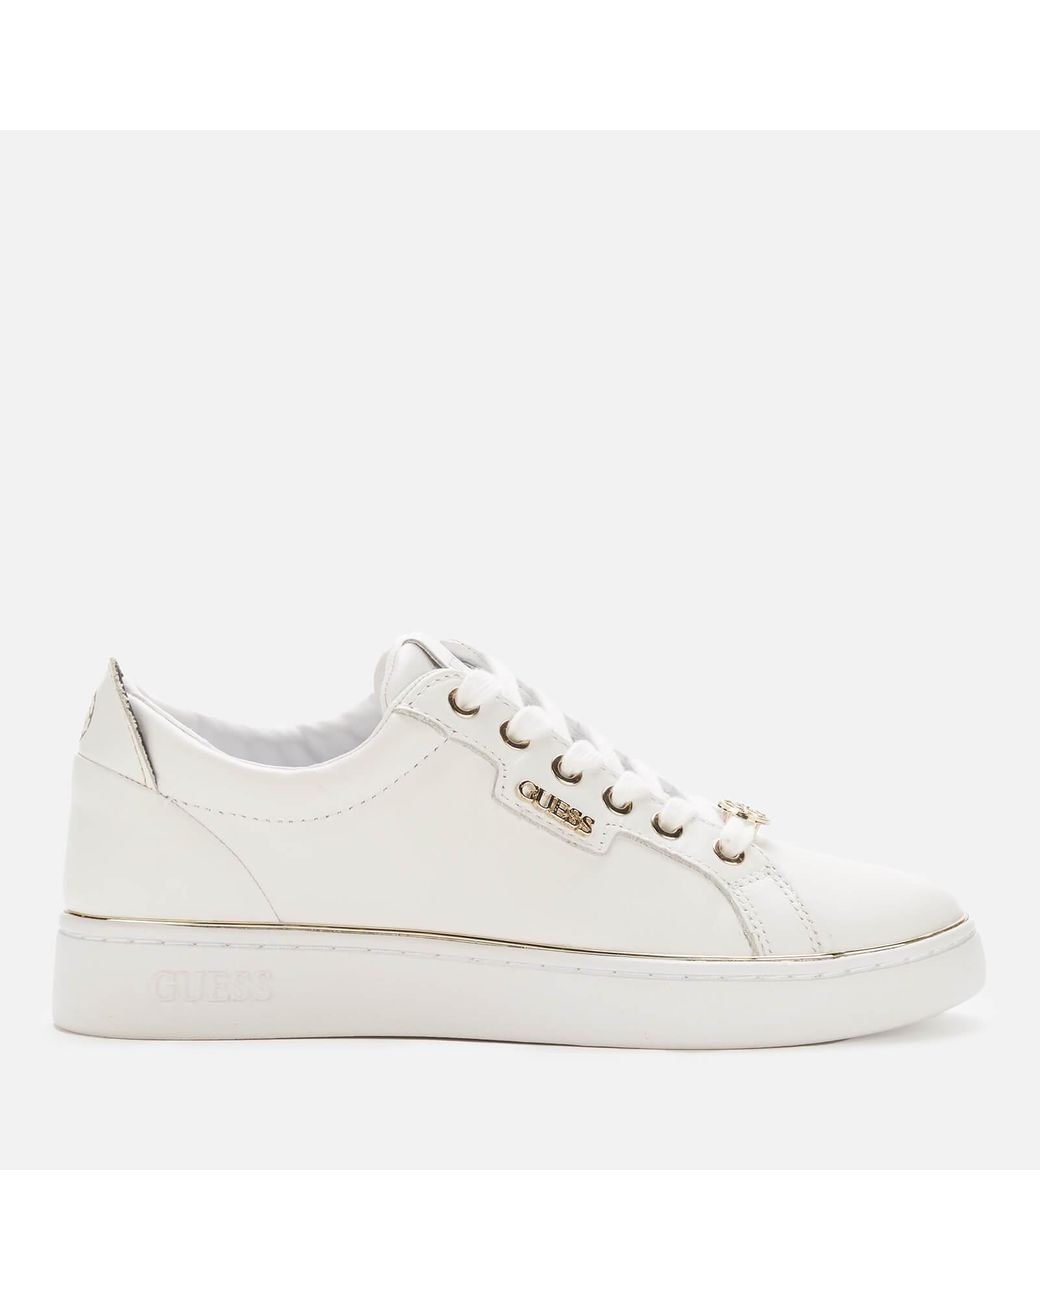 Guess Betea Leather Low Top Trainers in White | Lyst UK